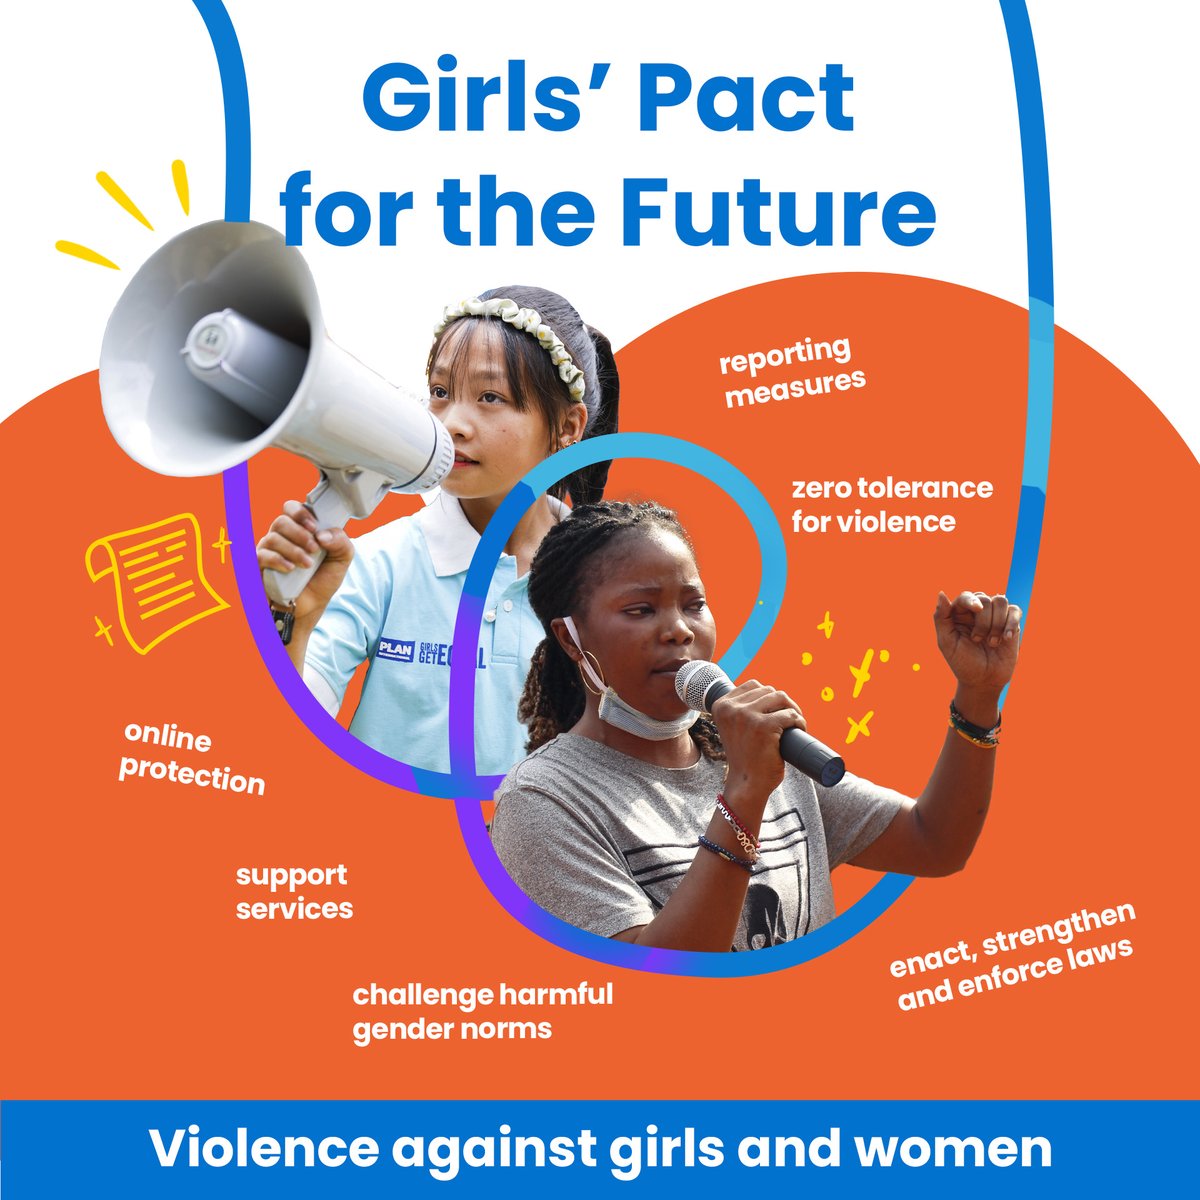 'In the future we envision, peace prevails. Conflict resolution is prioritised & diplomacy is valued over violence”. The #FutureGirlsWant is one where they are active participants in peacebuilding efforts, bringing their unique perspectives and solutions to the table.